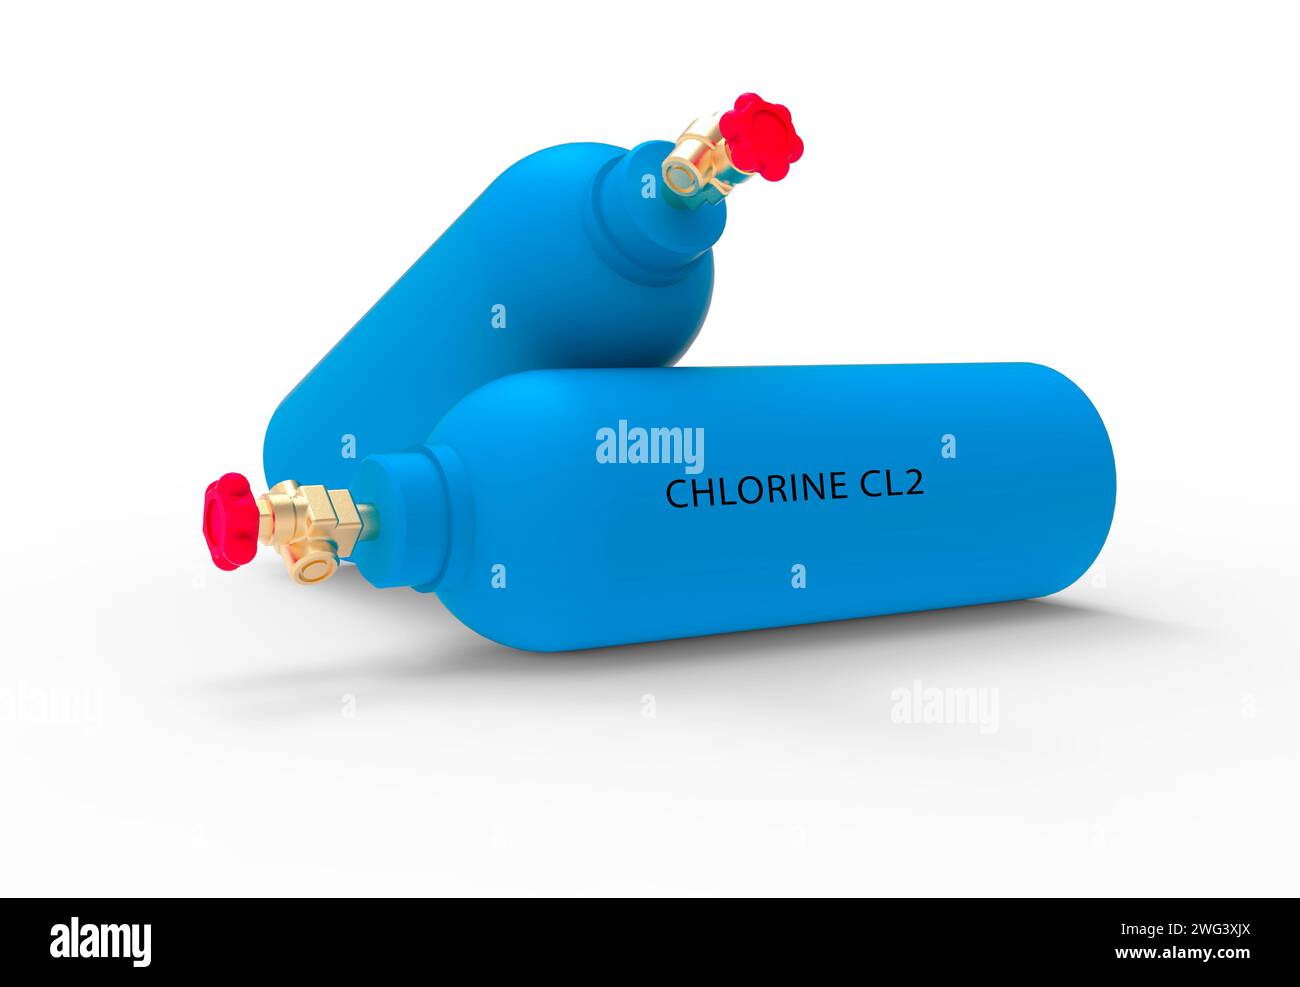 Canister of chlorine gas Stock Photo